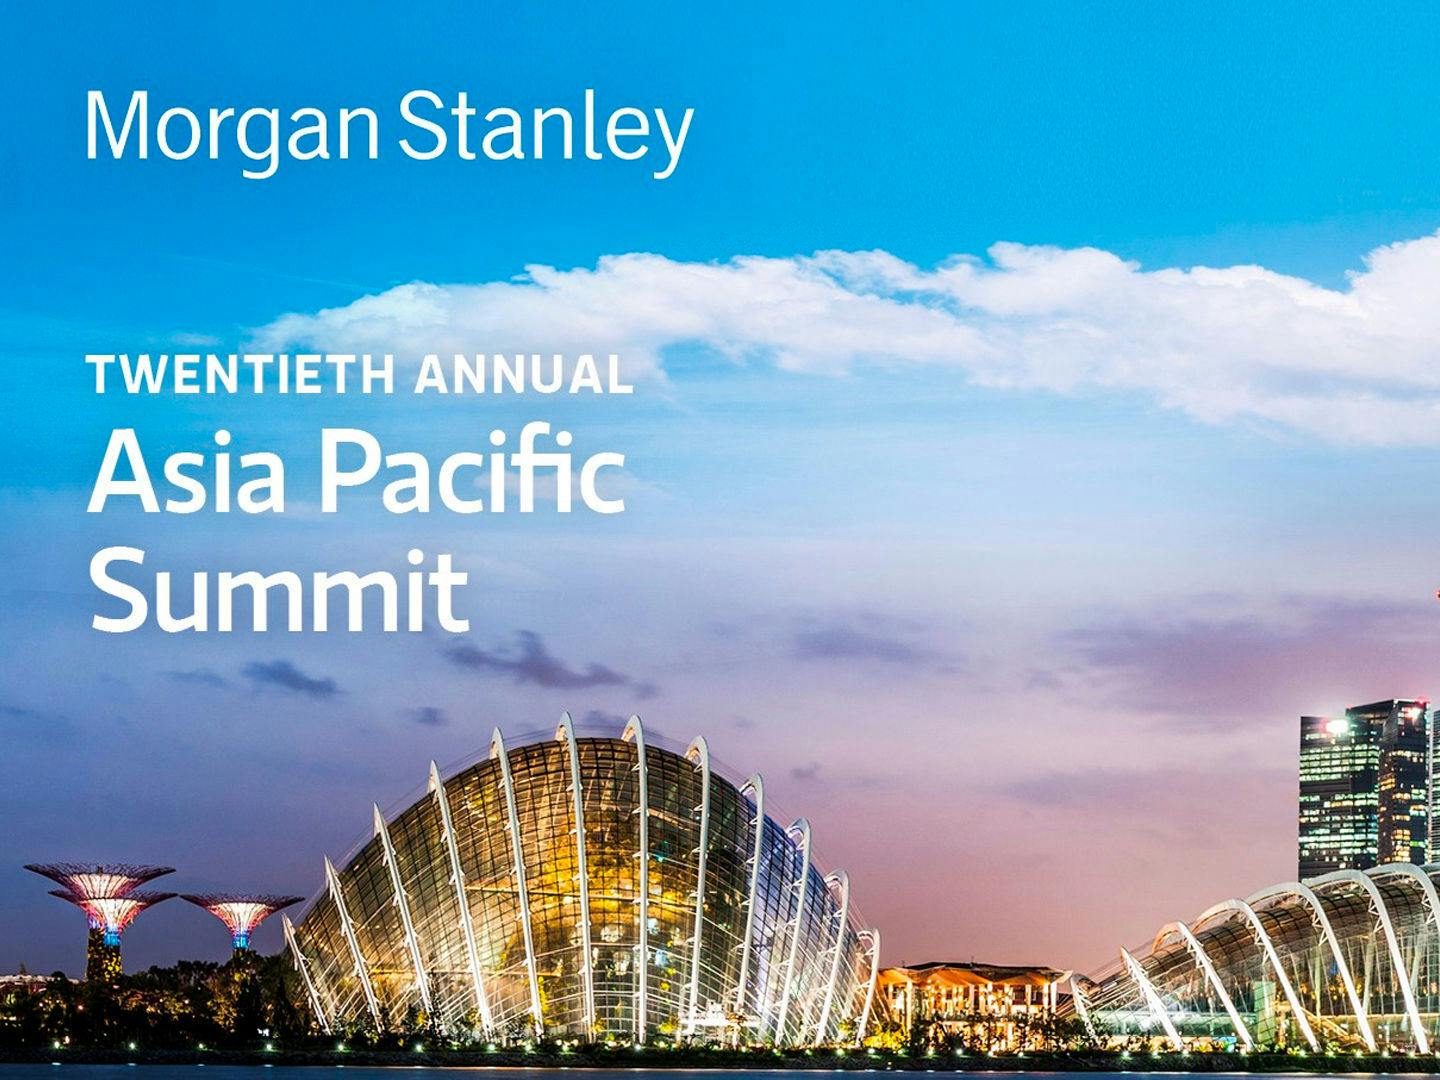 Morgan Stanley 20th Annual Asia Pacific Summit: Venturous – China’s first Citytech™ Group